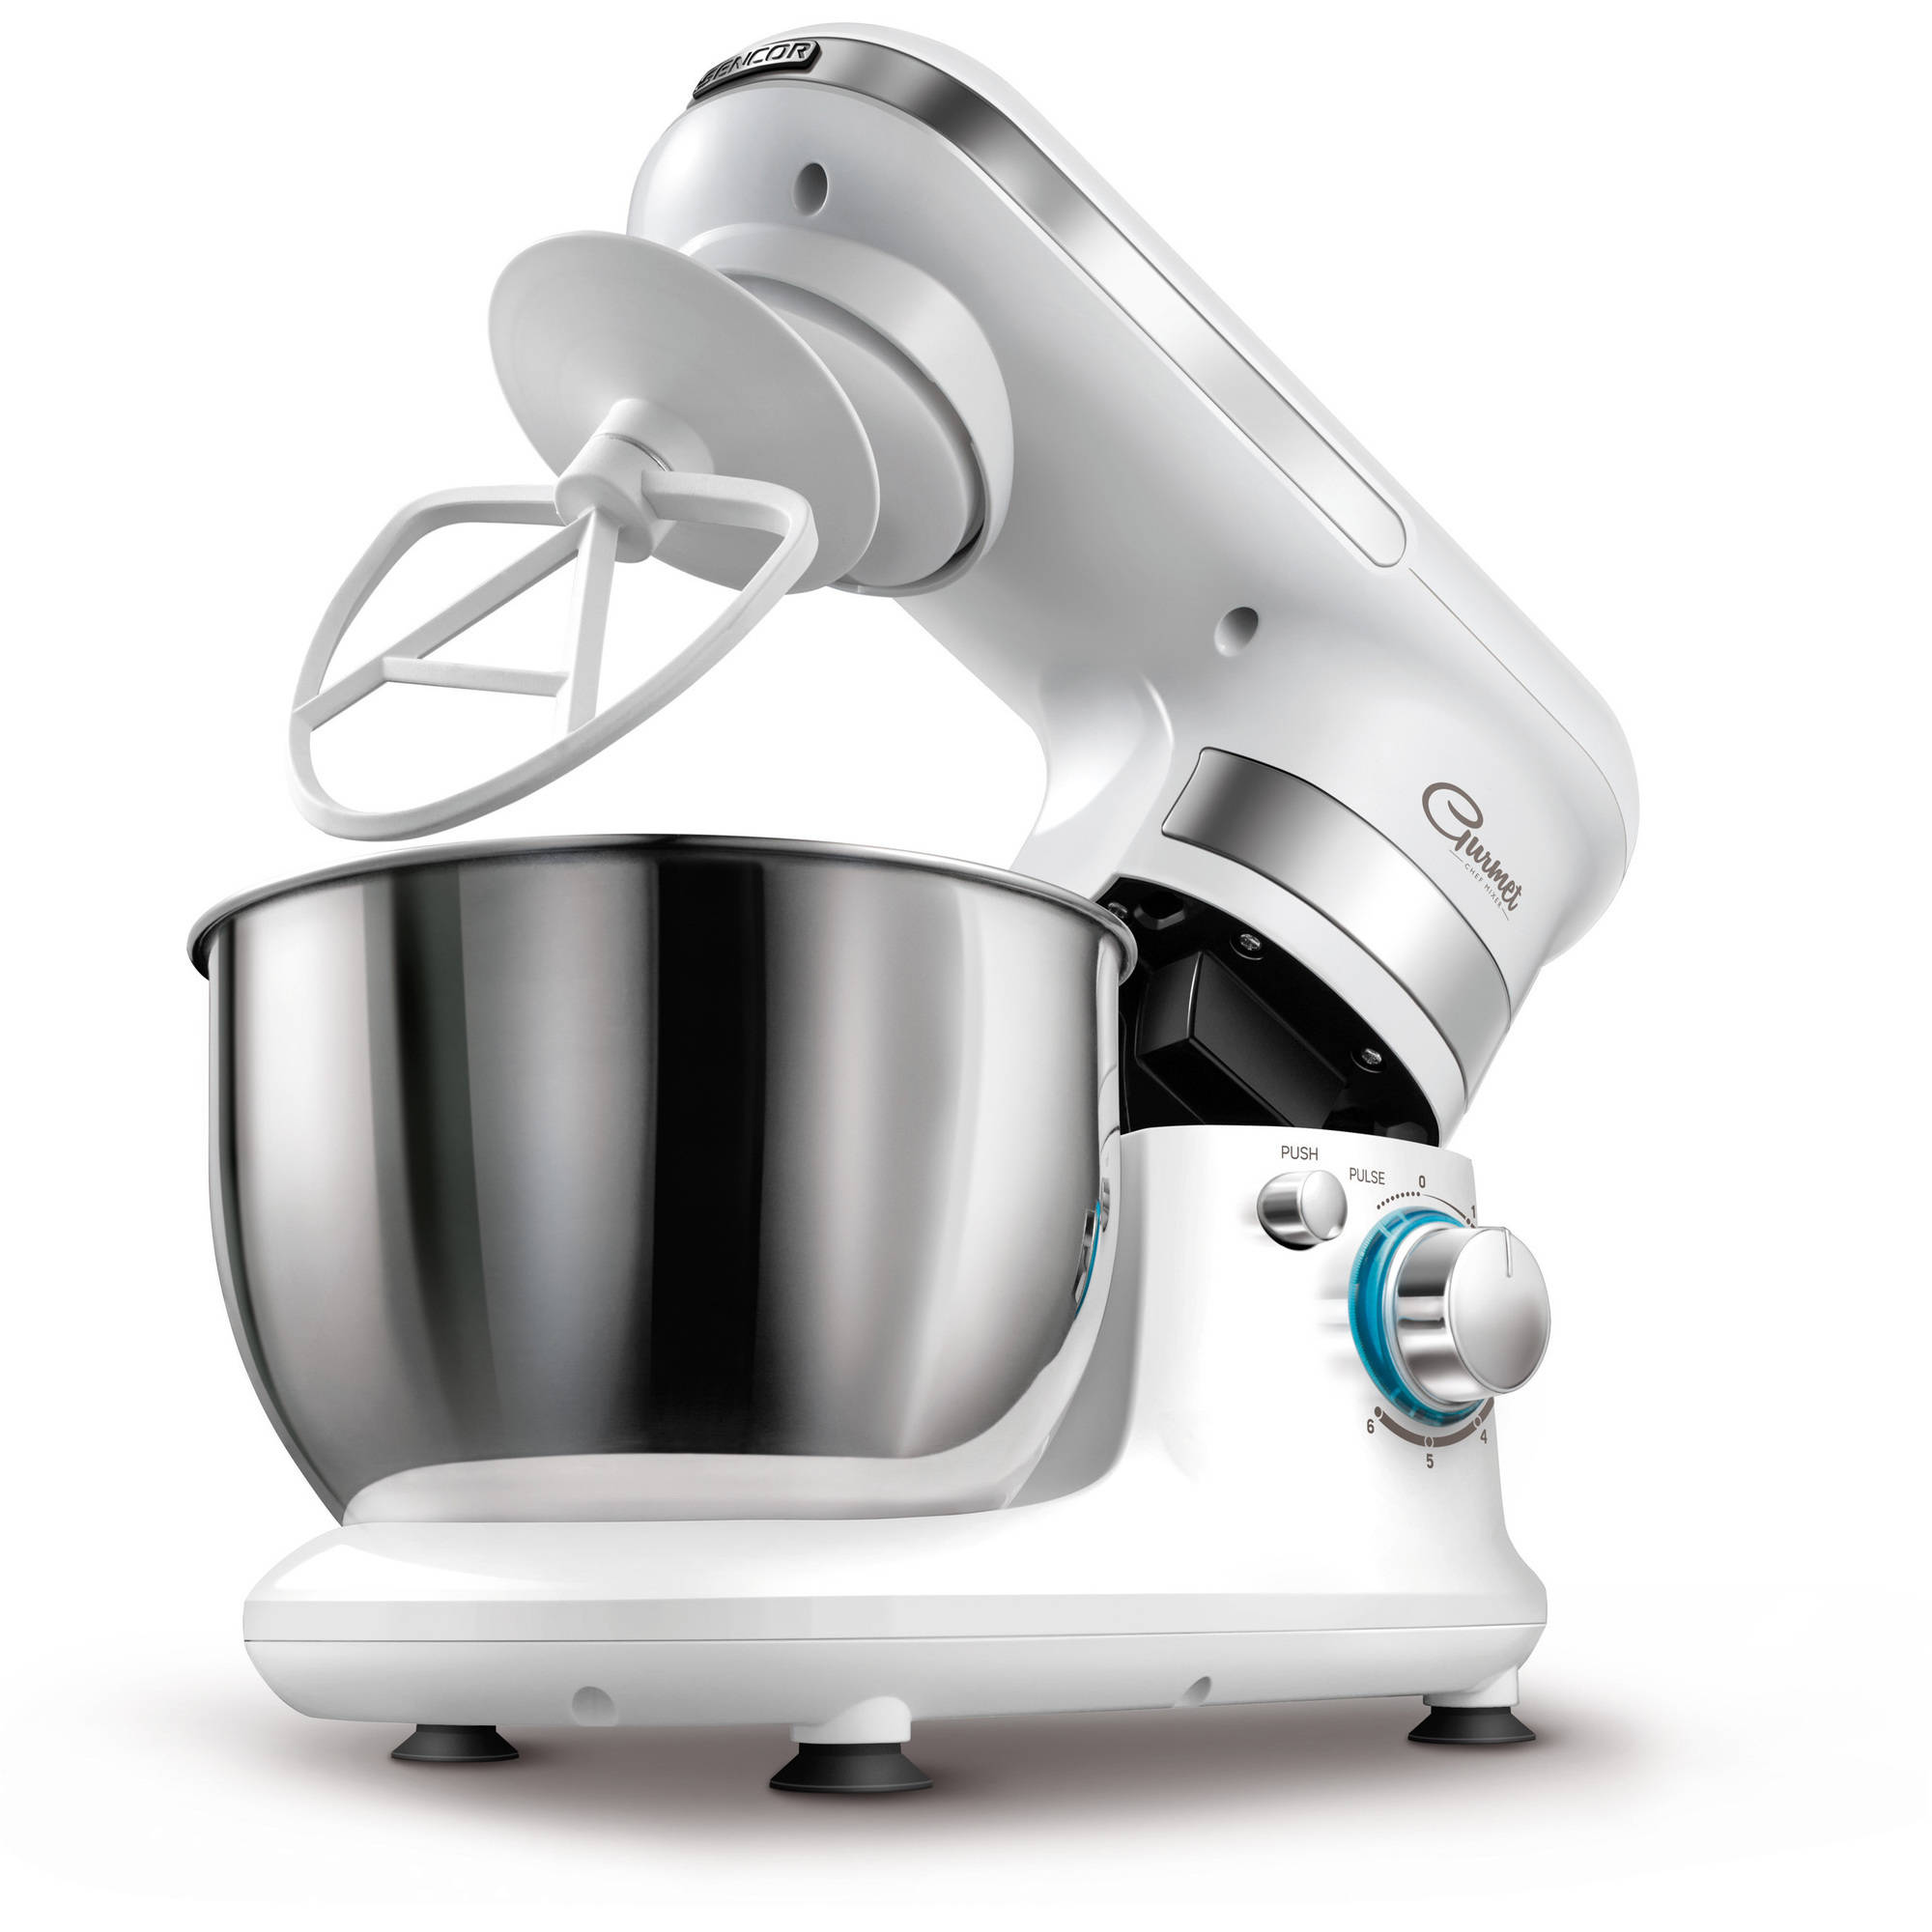 Sencor STM 3010WH 4.2 Quart 6 Speed Food Mixer with Stainless Steel Bowl, White - image 2 of 3